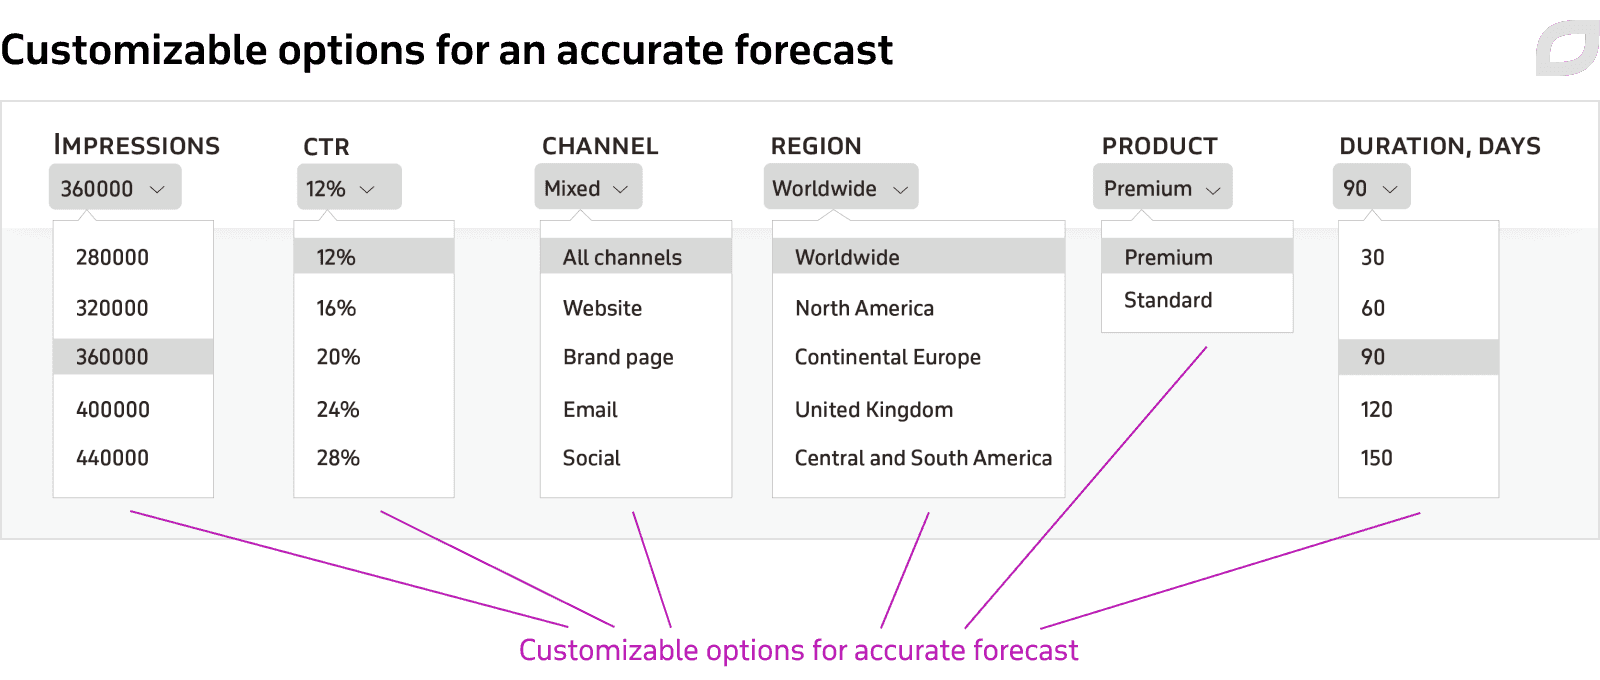 Customizable options for an accurate forecast